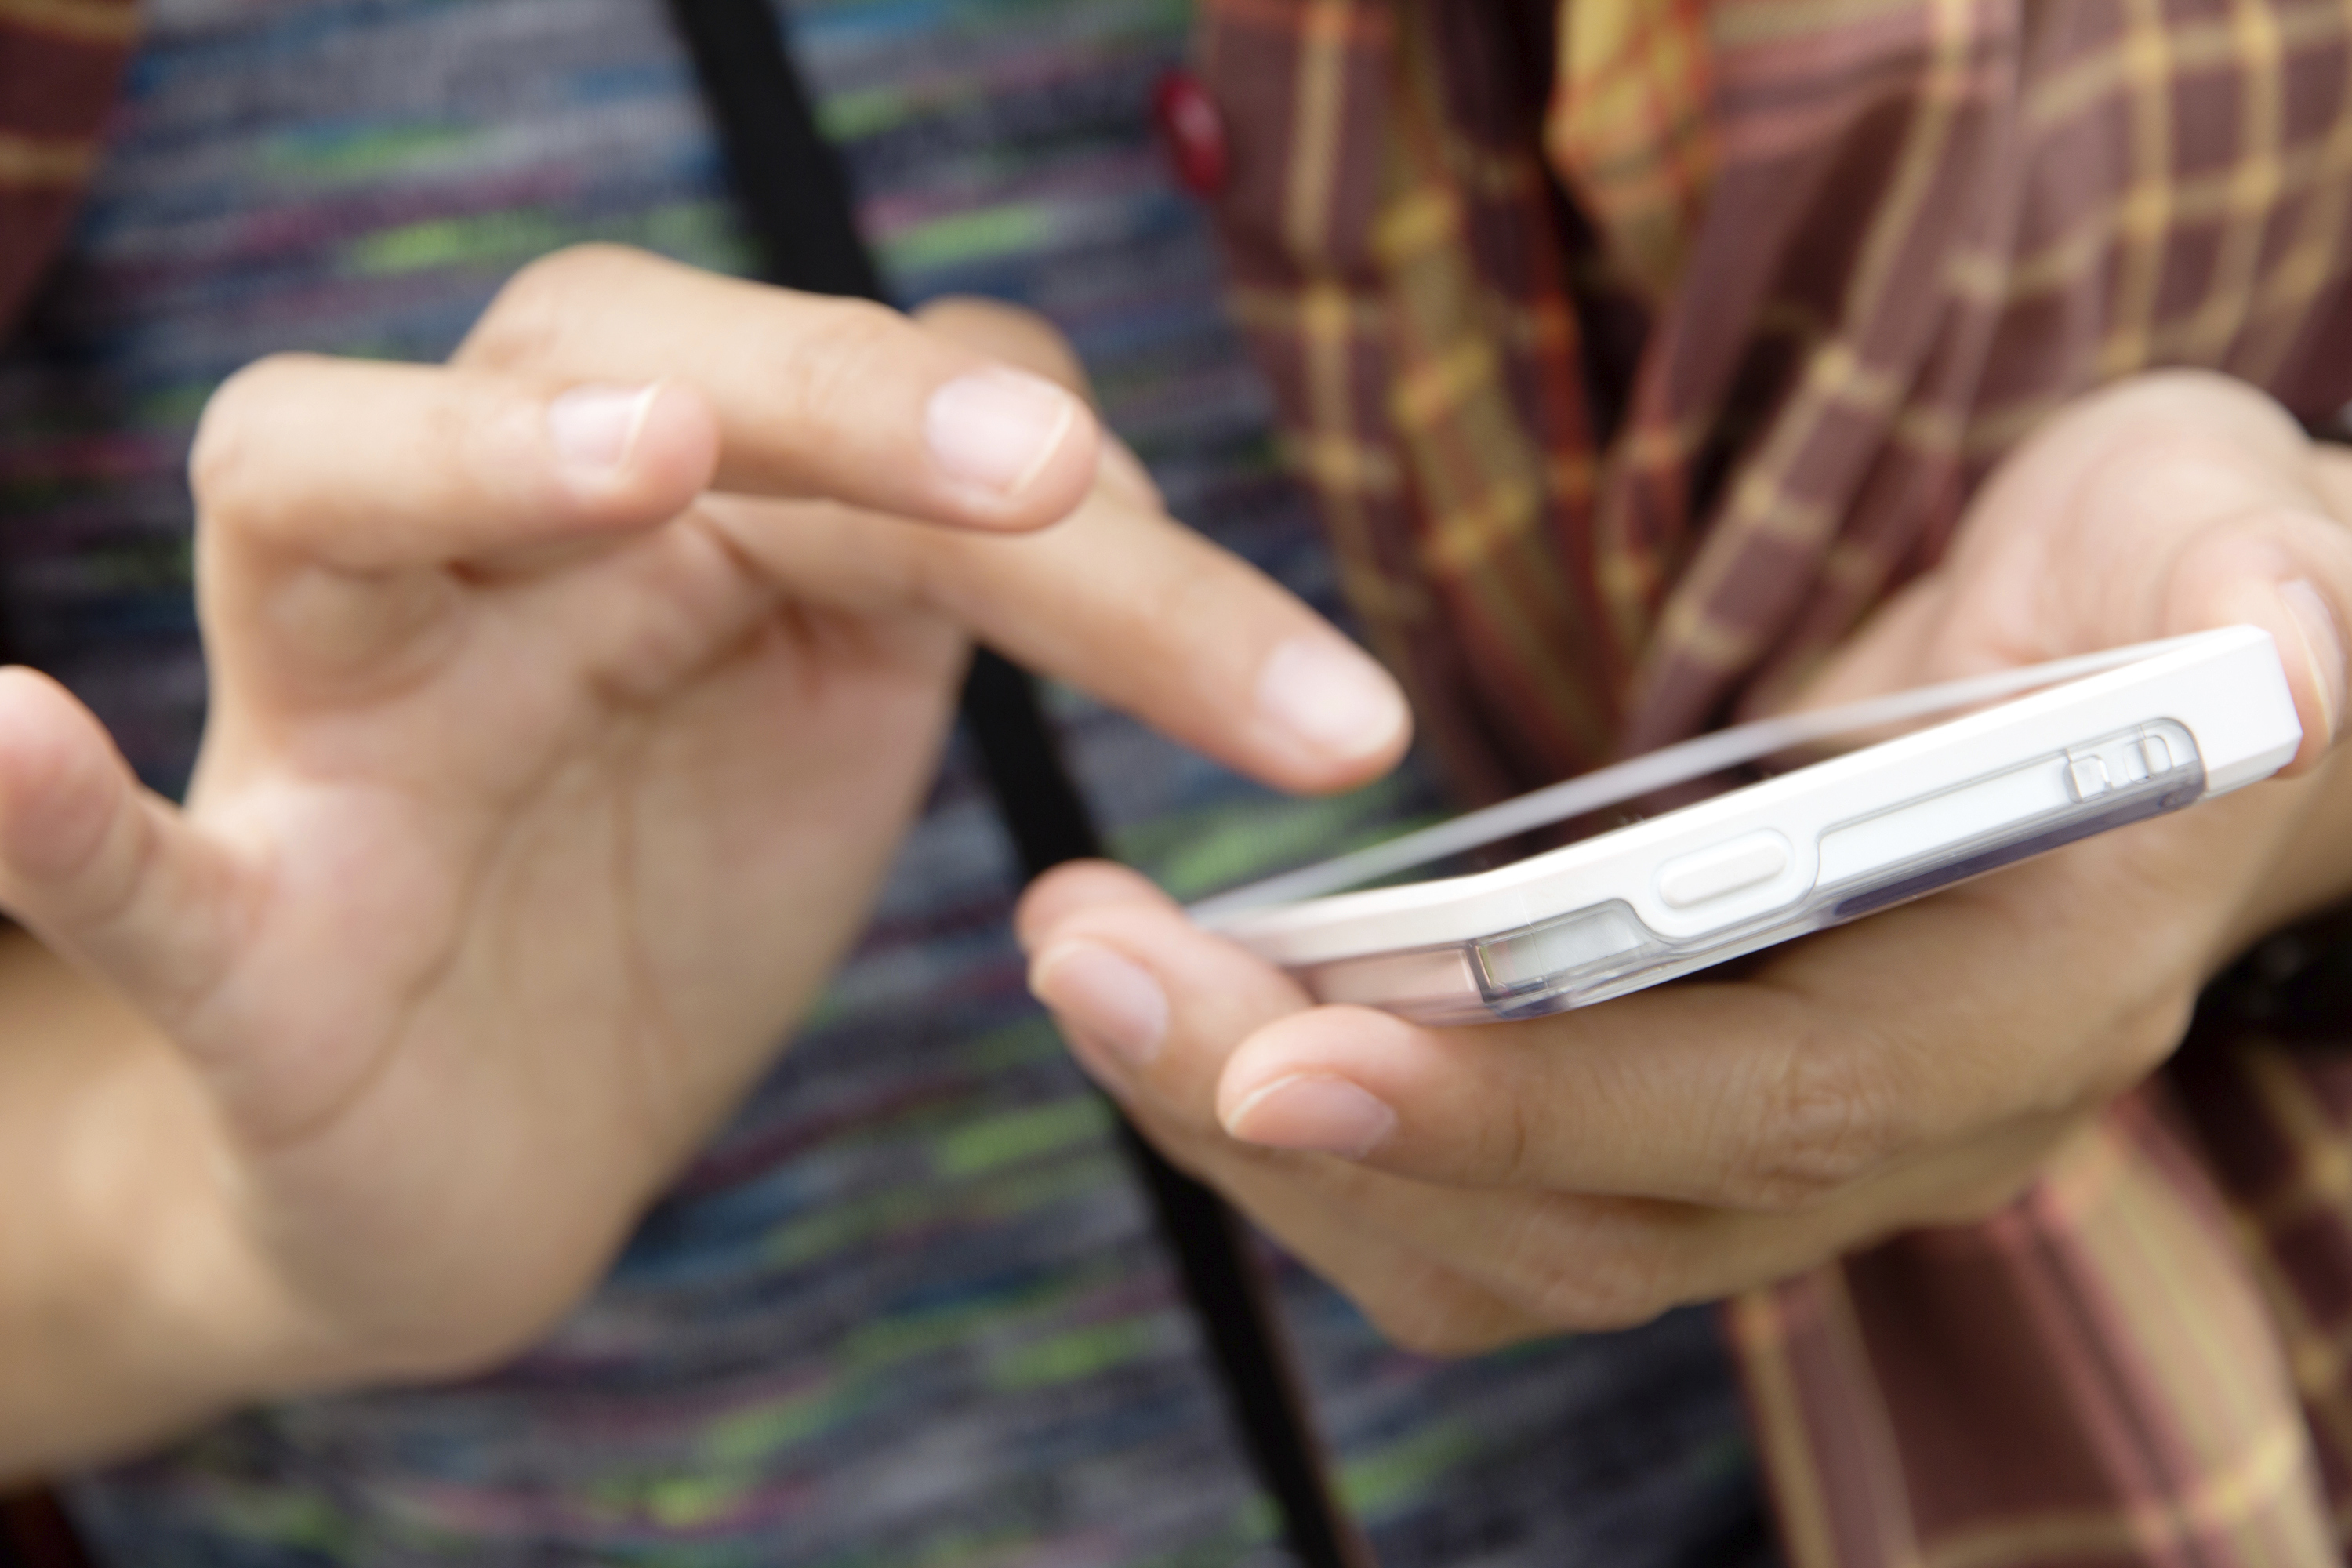 More youngsters are being targeted by text or email, figures show.